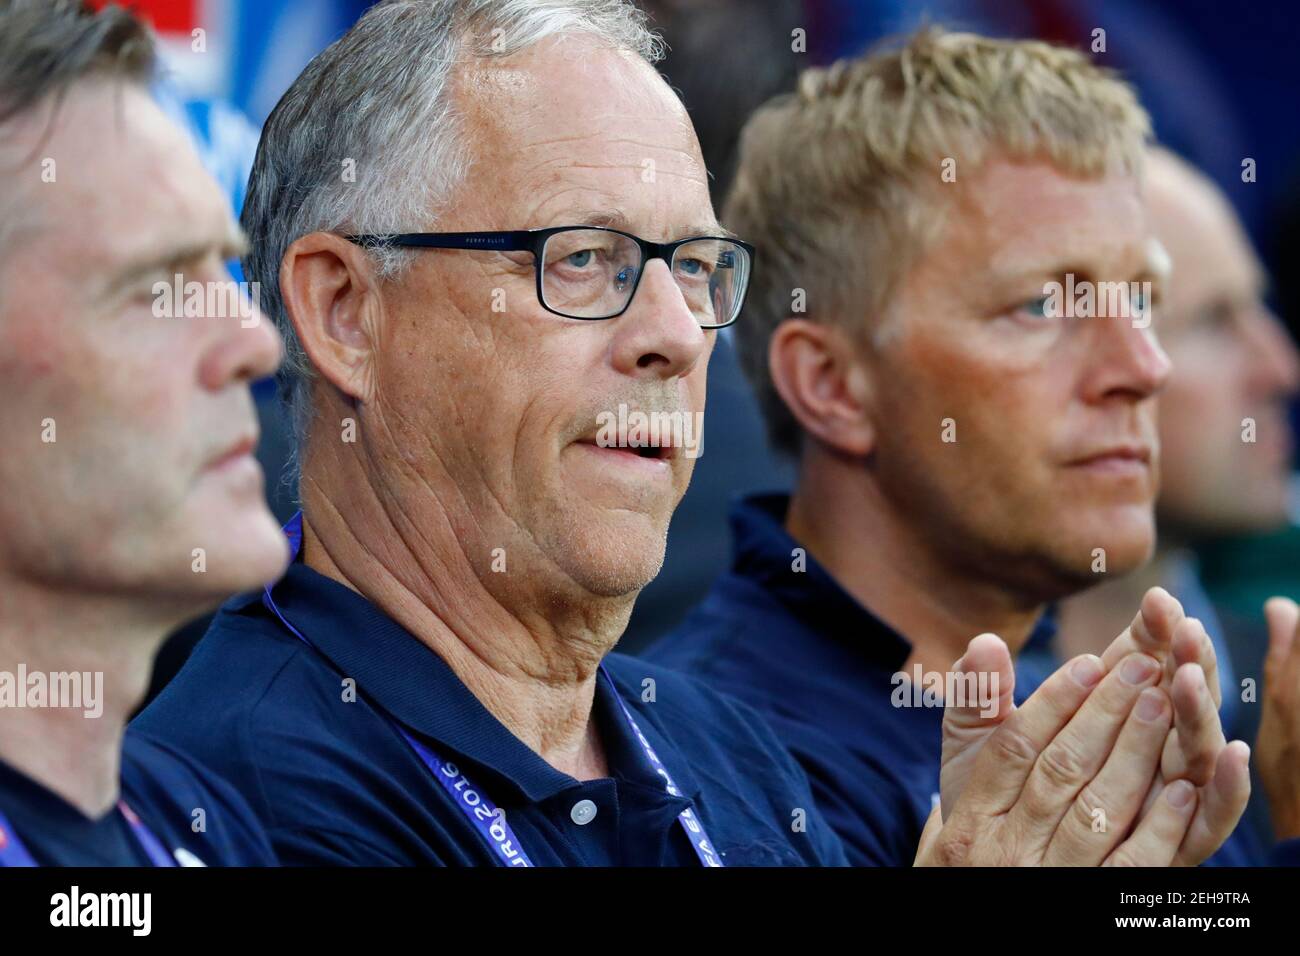 Football Soccer - England v Iceland - EURO 2016 - Round of 16 - Stade de Nice, Nice, France - 27/6/16  Iceland joint head coaches Lars Lagerback (C) and Heimir Hallgrimsson  REUTERS/Michael Dalder  Livepic Stock Photo